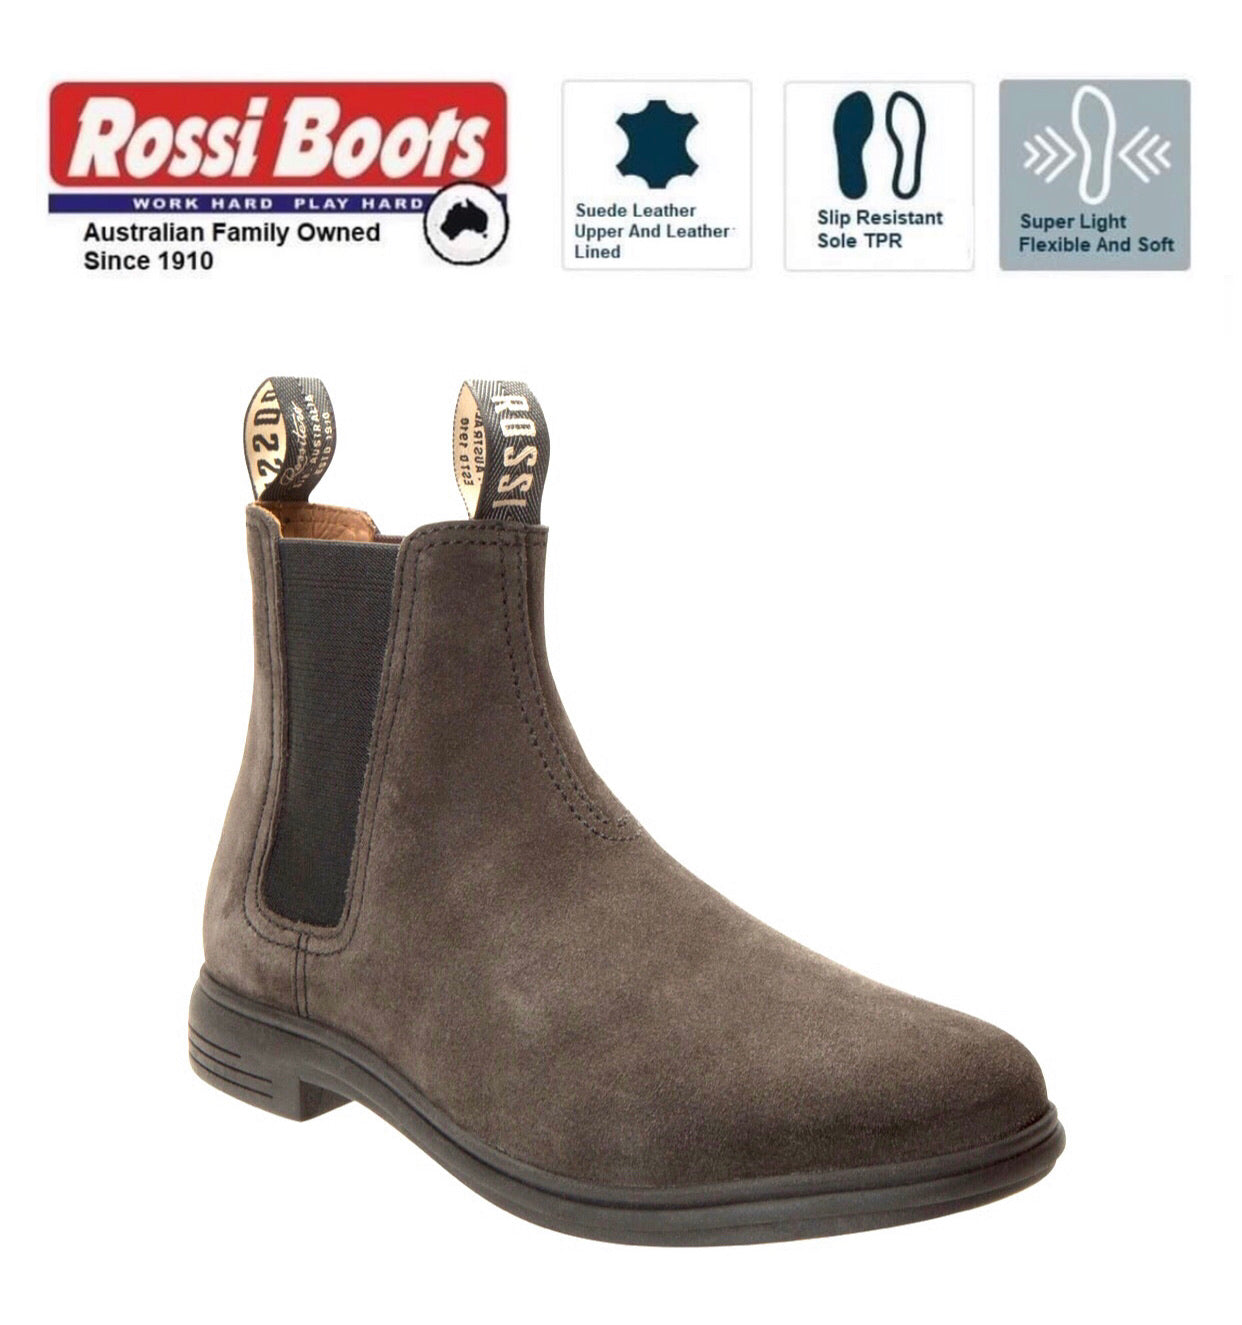 Rossi Boots 142 Barossa Charcoal Suede Leather Chelsea Dress Boot